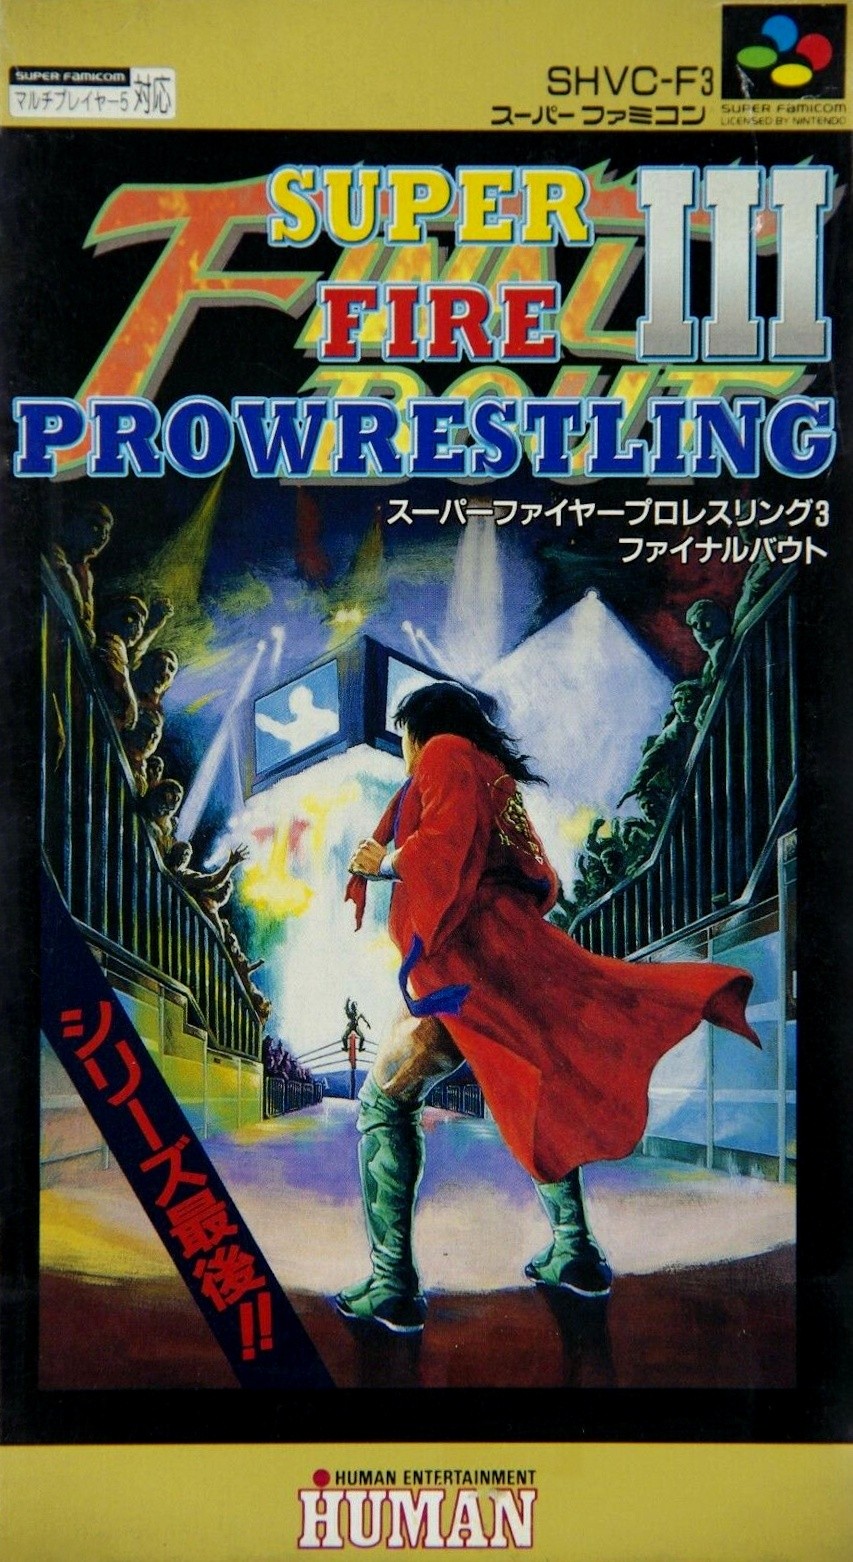 Super Fire Pro Wrestling 3 Final Bout cover